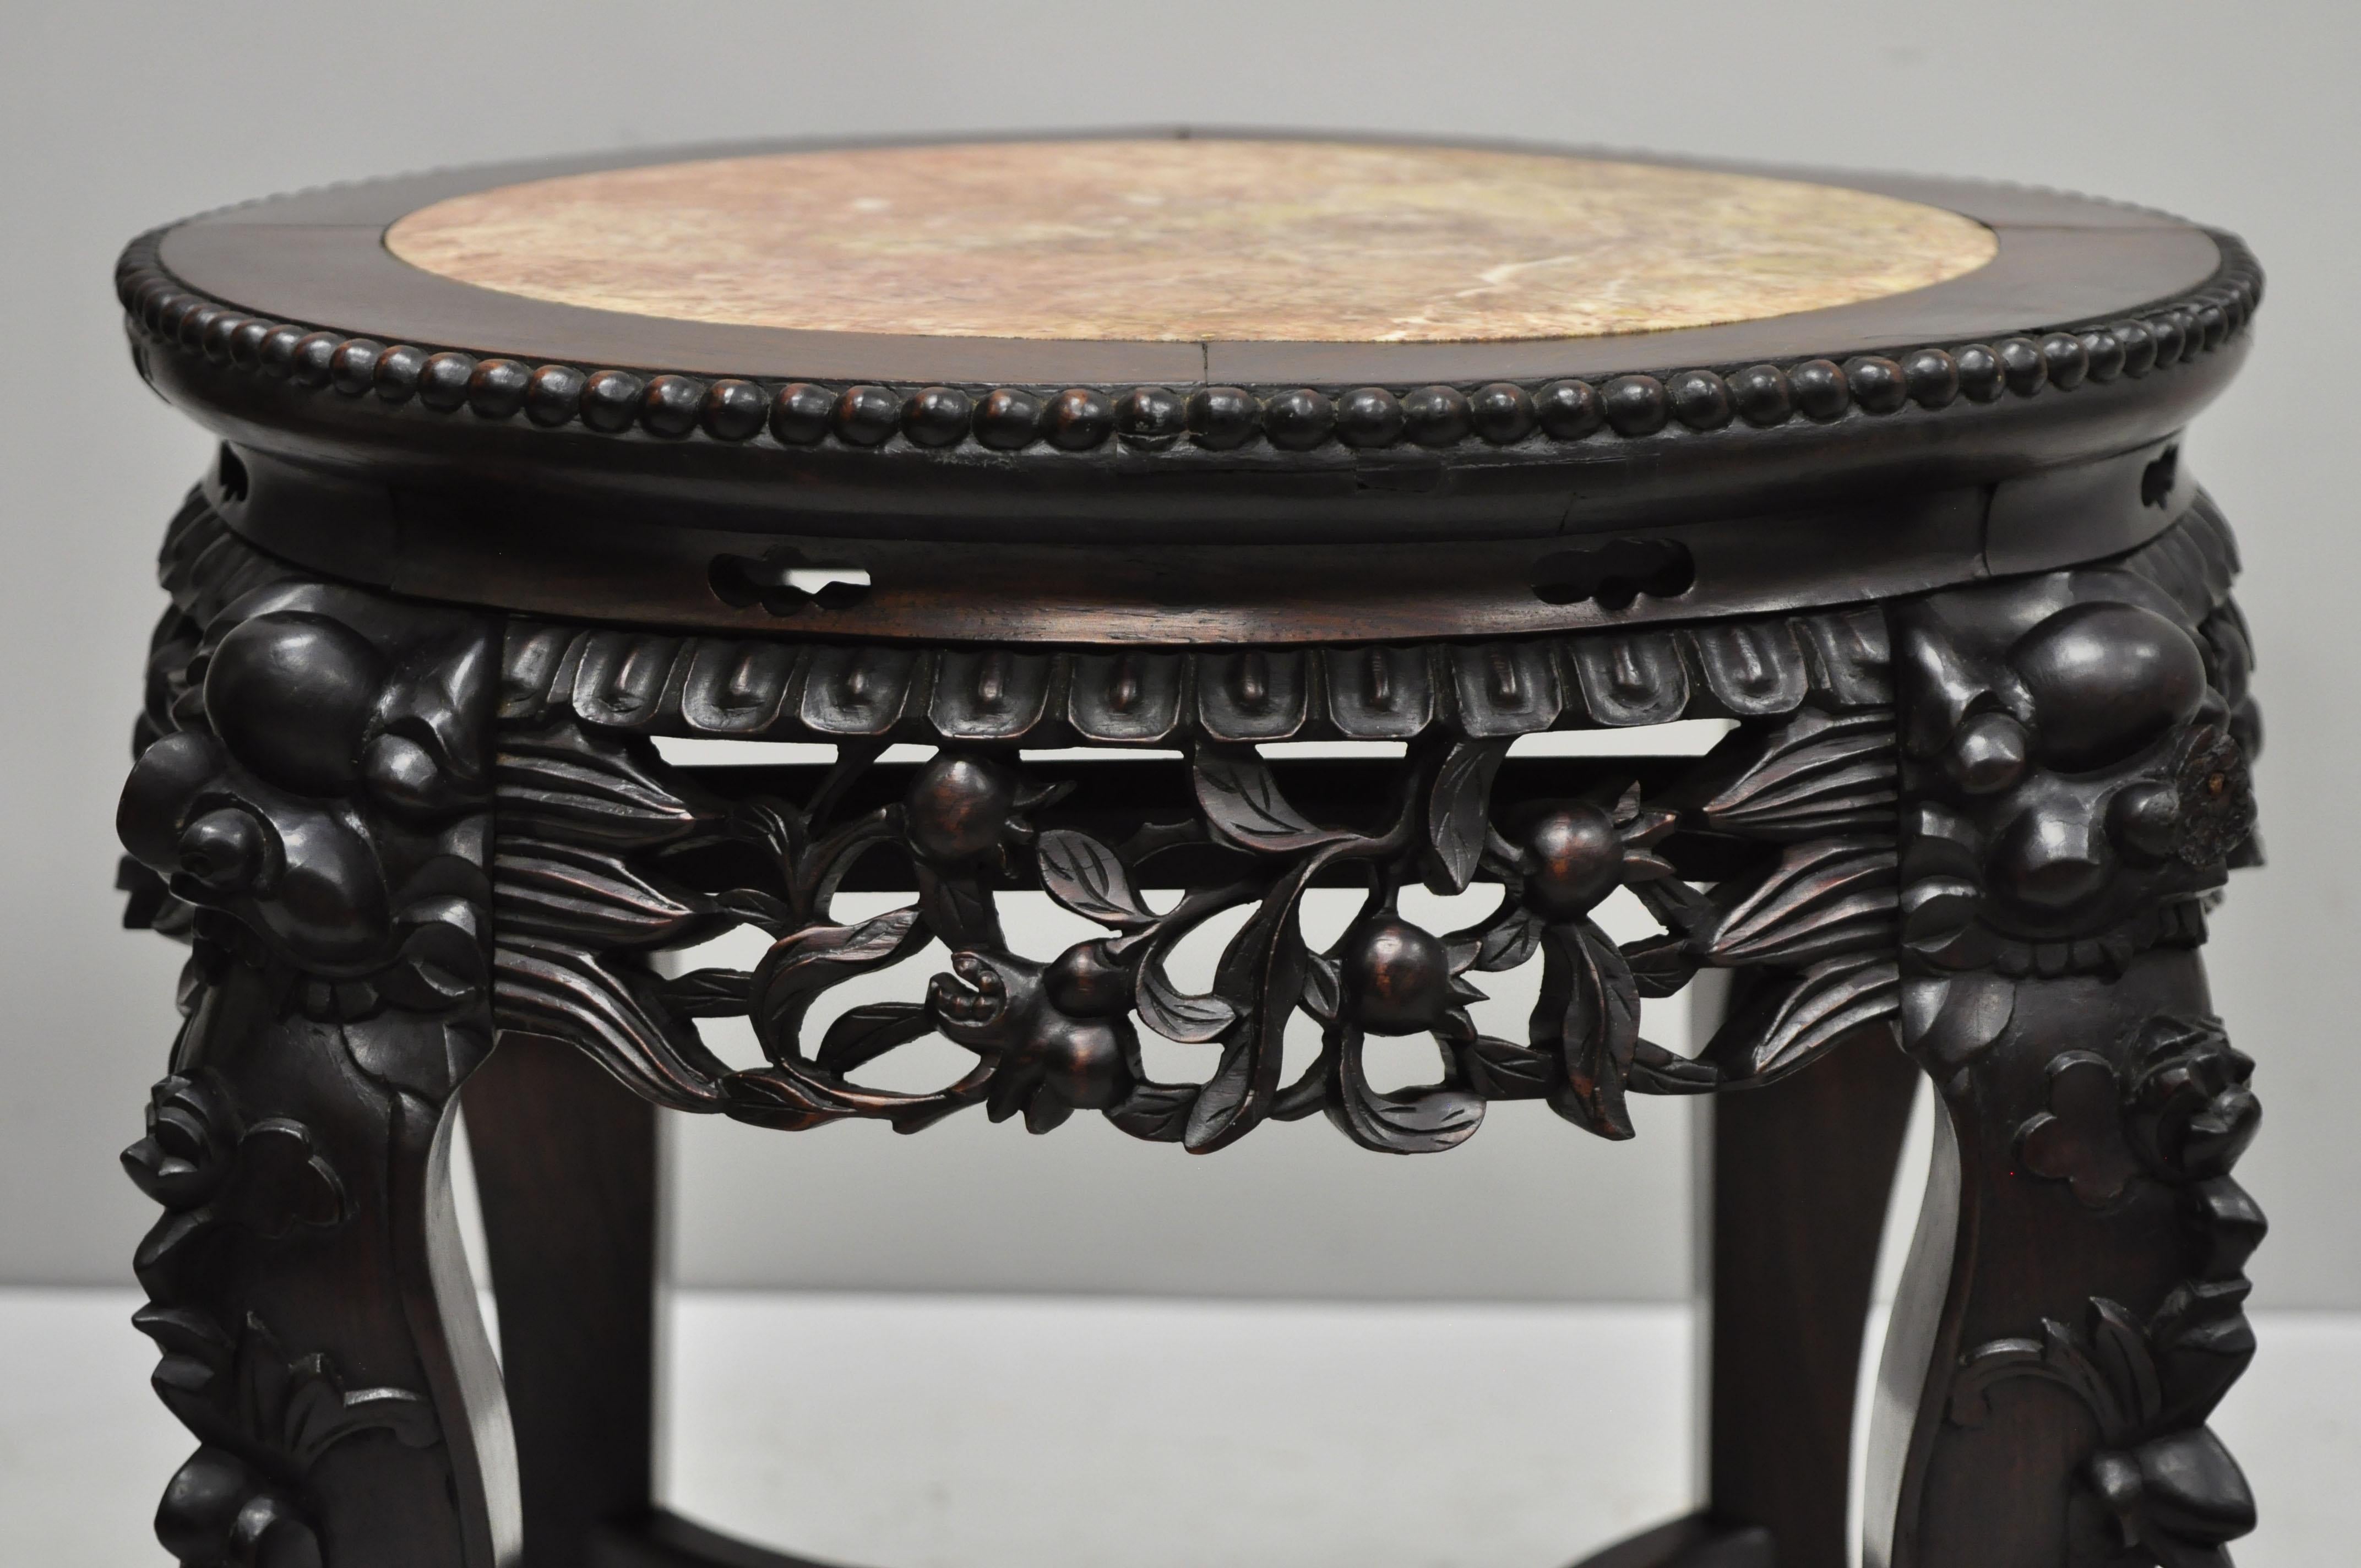 Antique Carved Hardwood Rosewood Marble-Top Chinese Pedestal Table Plant Stand B 1